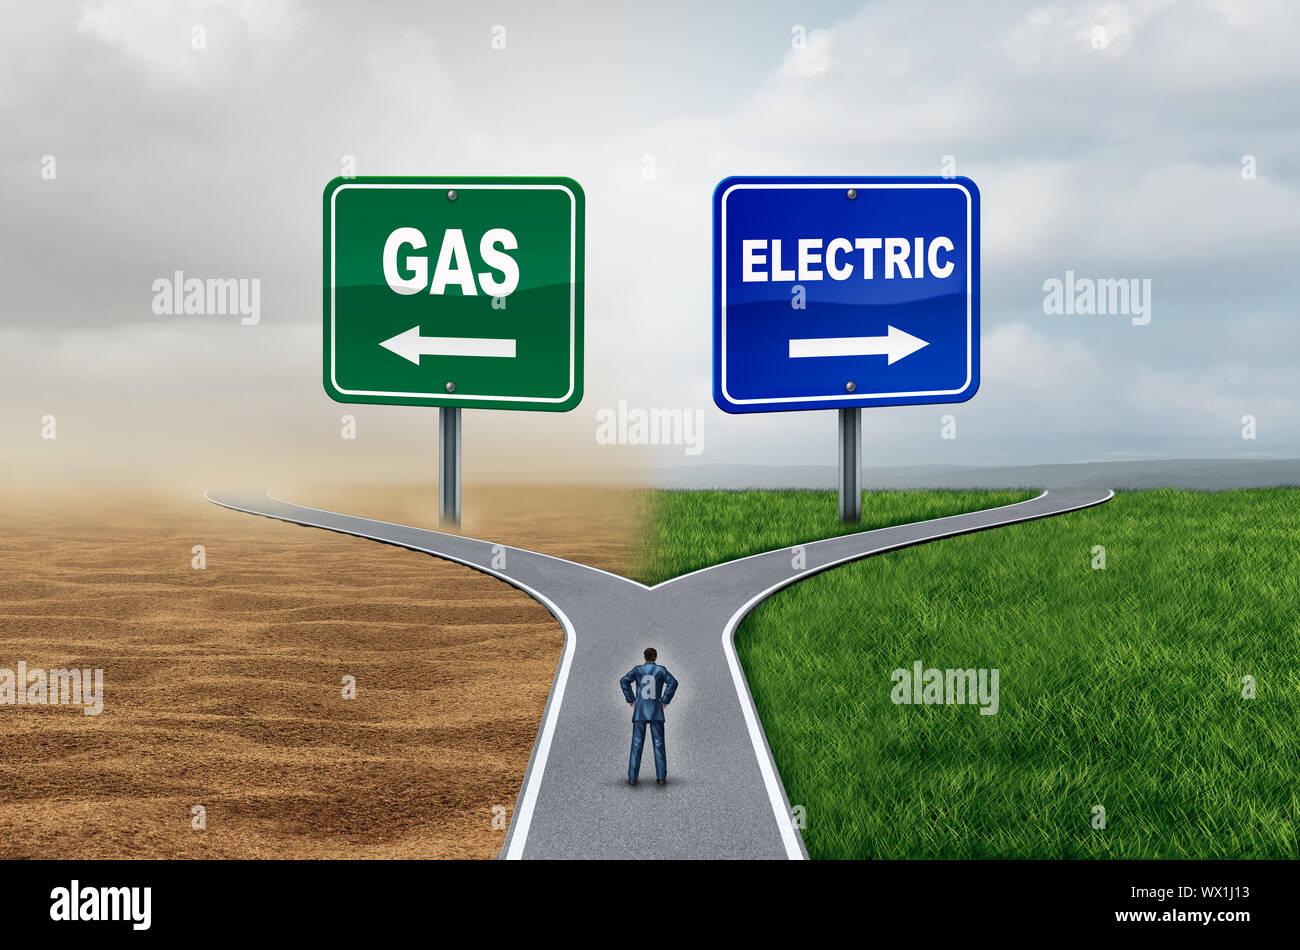 Gas vs electric energy transportation fuel concept as gasoline versus battery technology with 3D illustration elements. Stock Photo